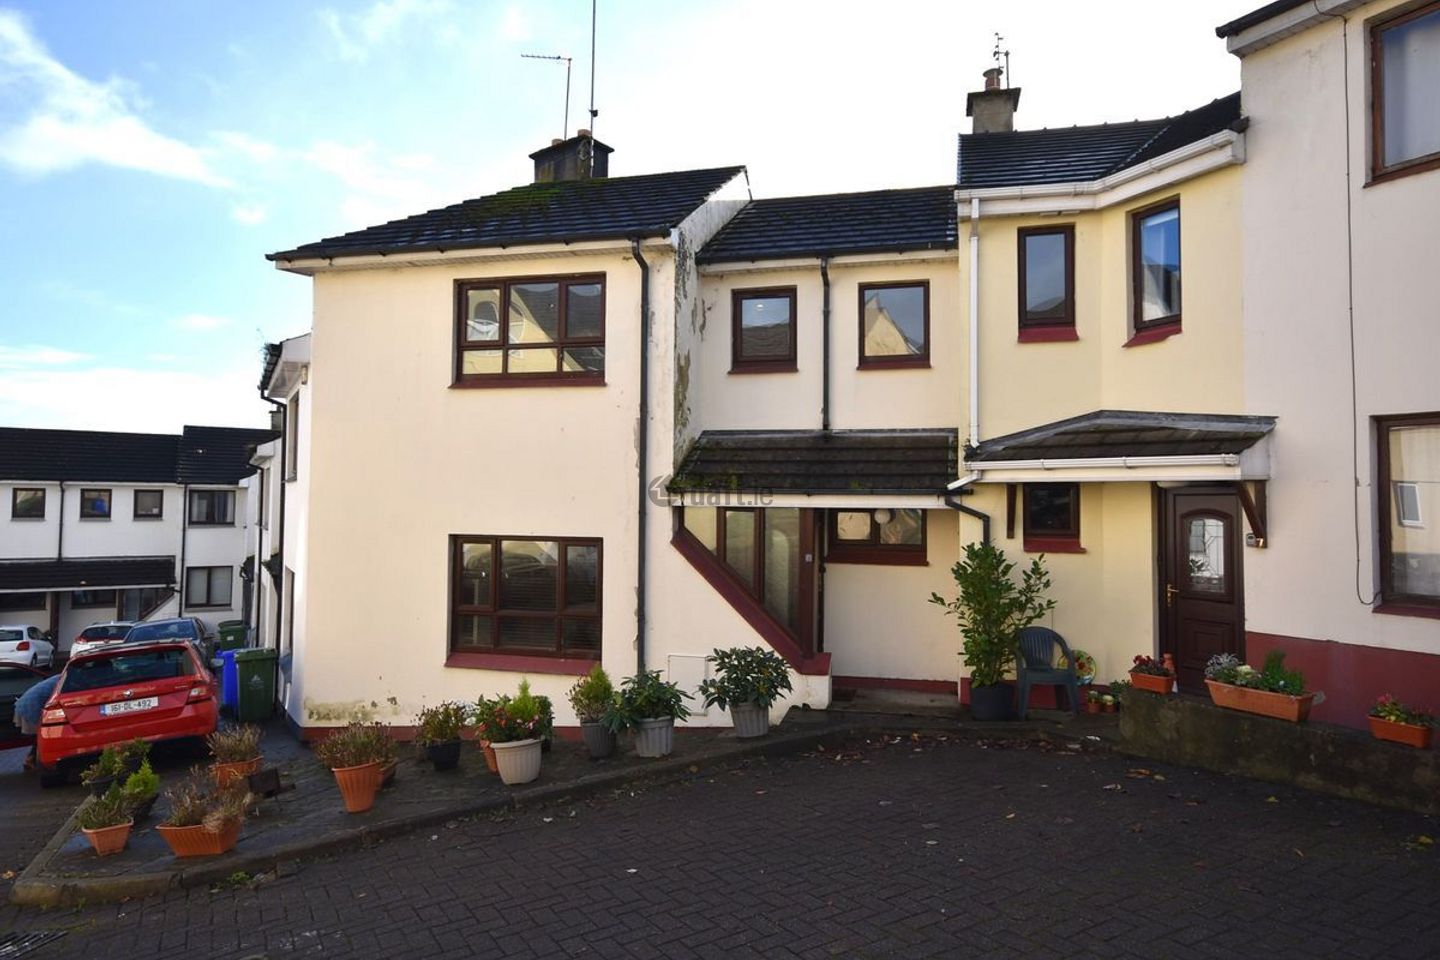 8 Academy Court, Letterkenny, Co. Donegal